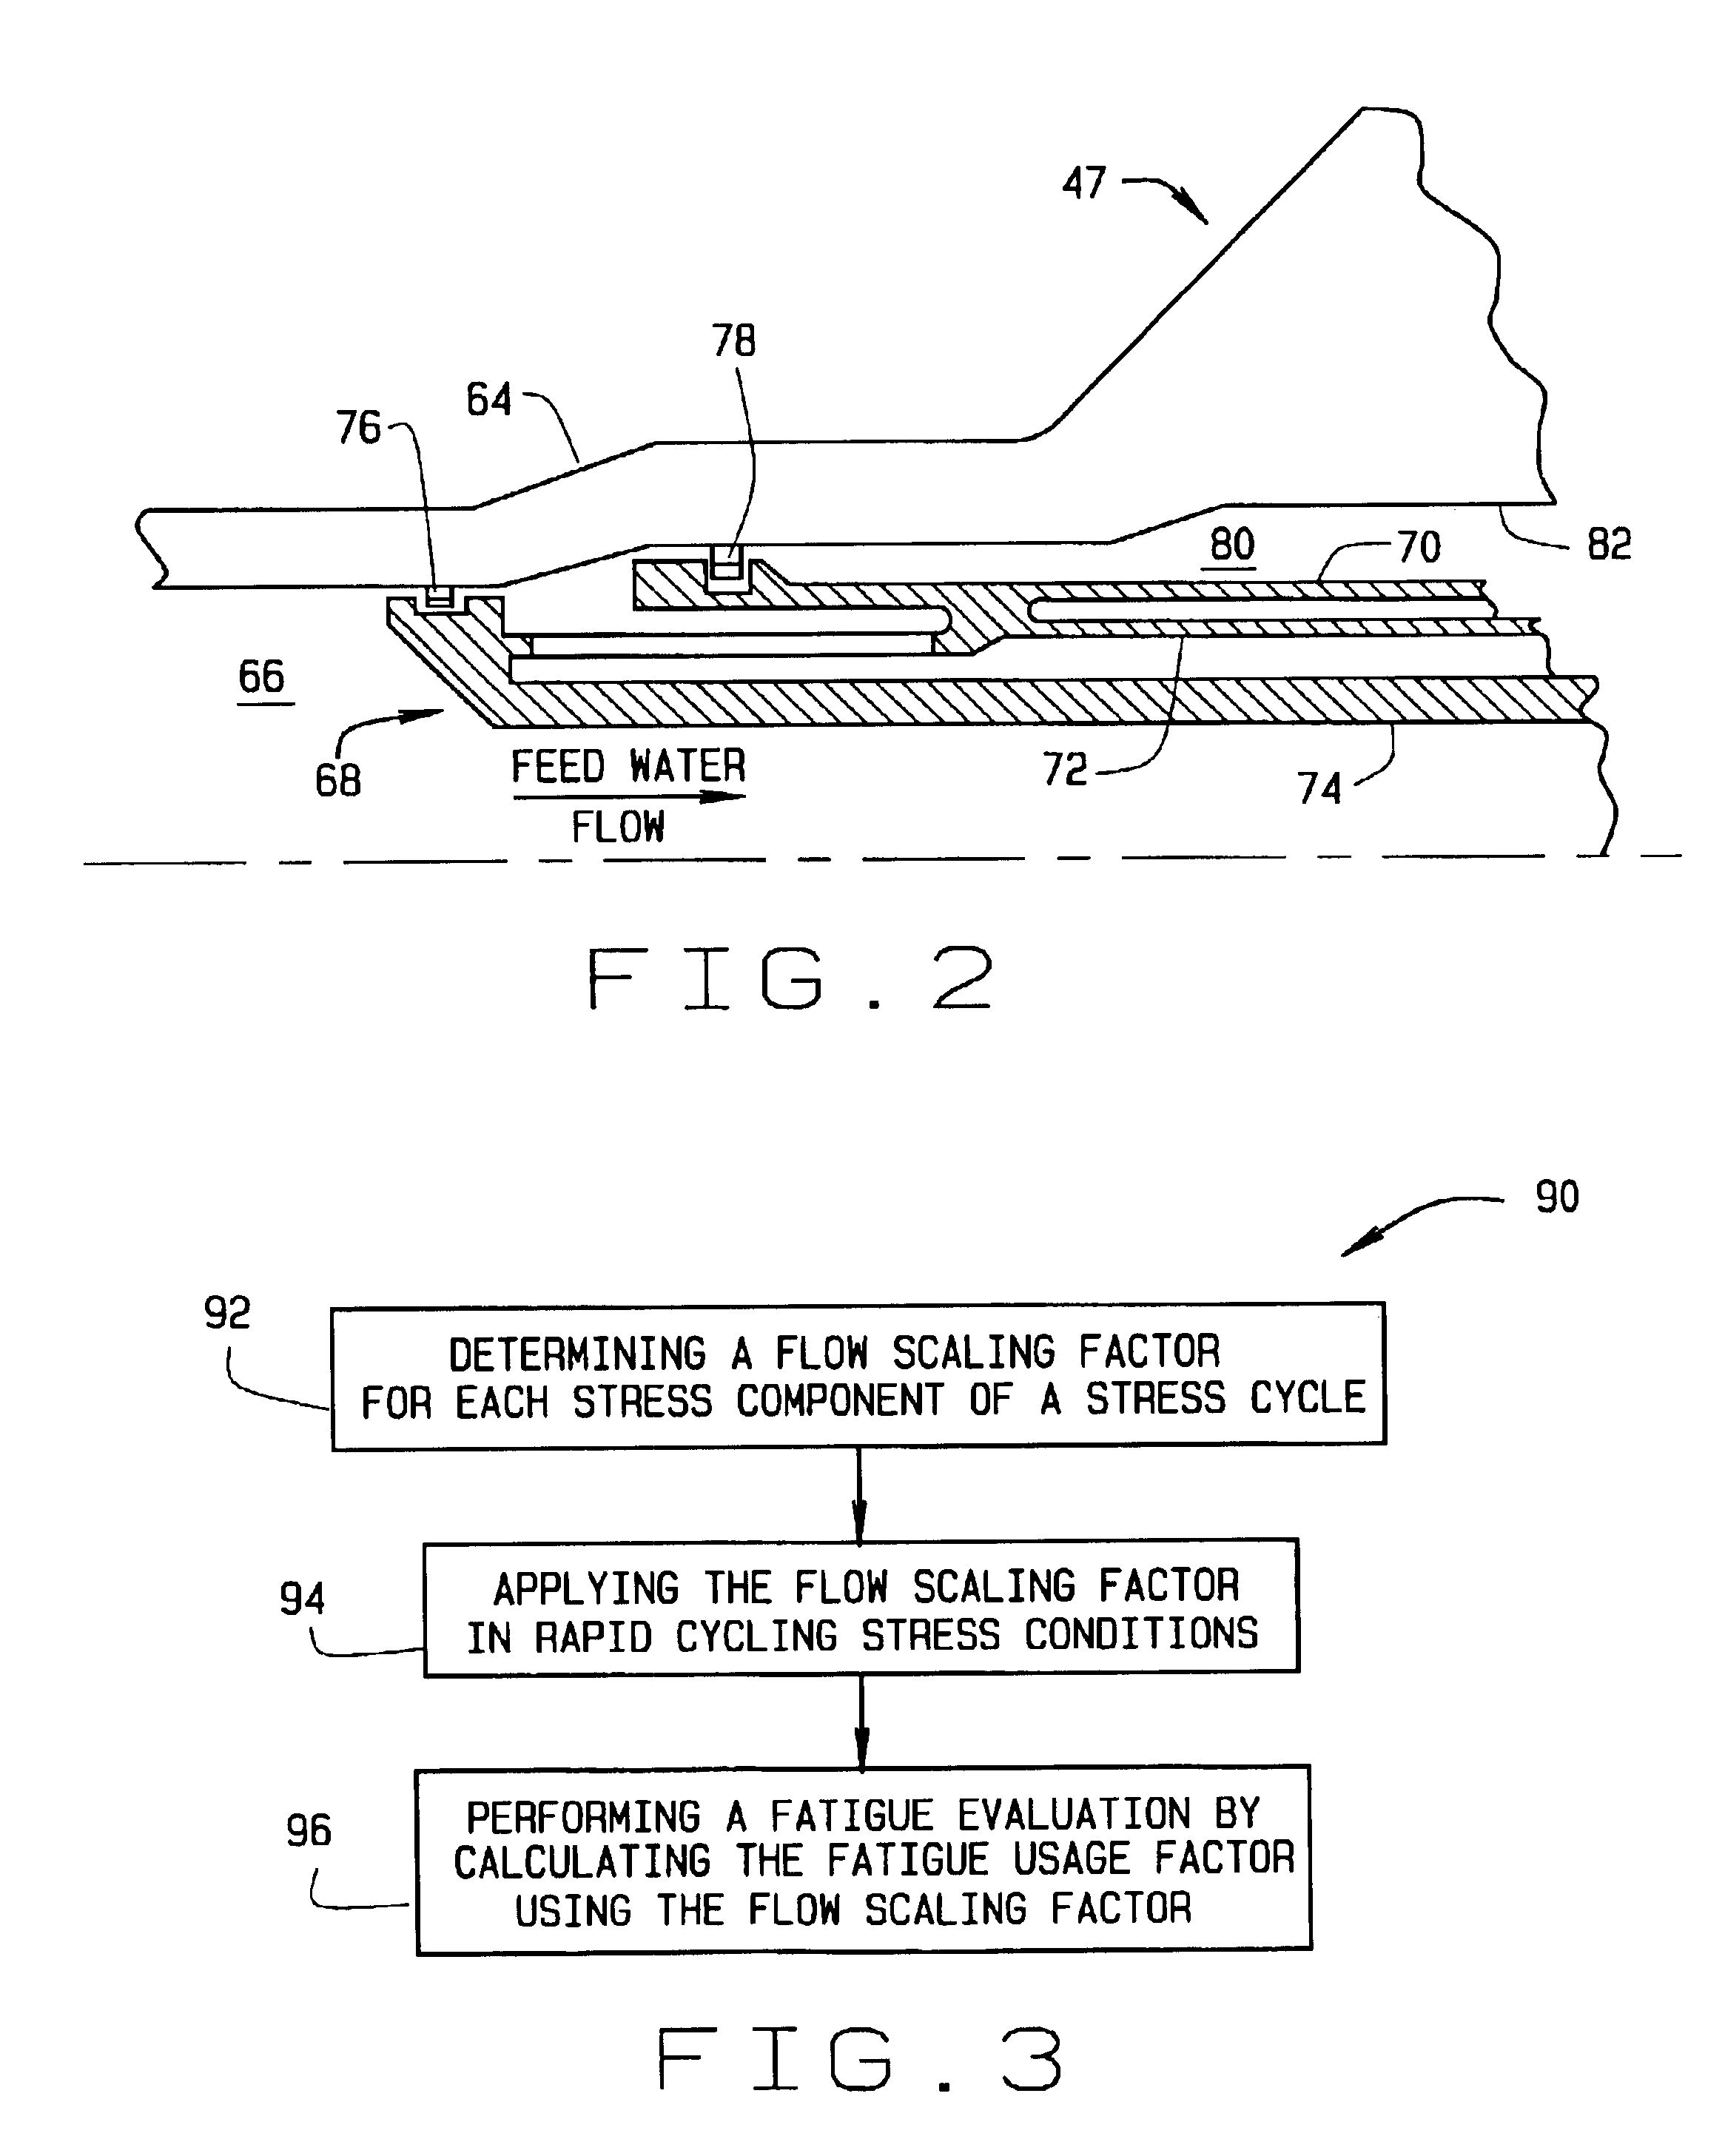 Methods and systems for determining fatigue usage factors for reactor components